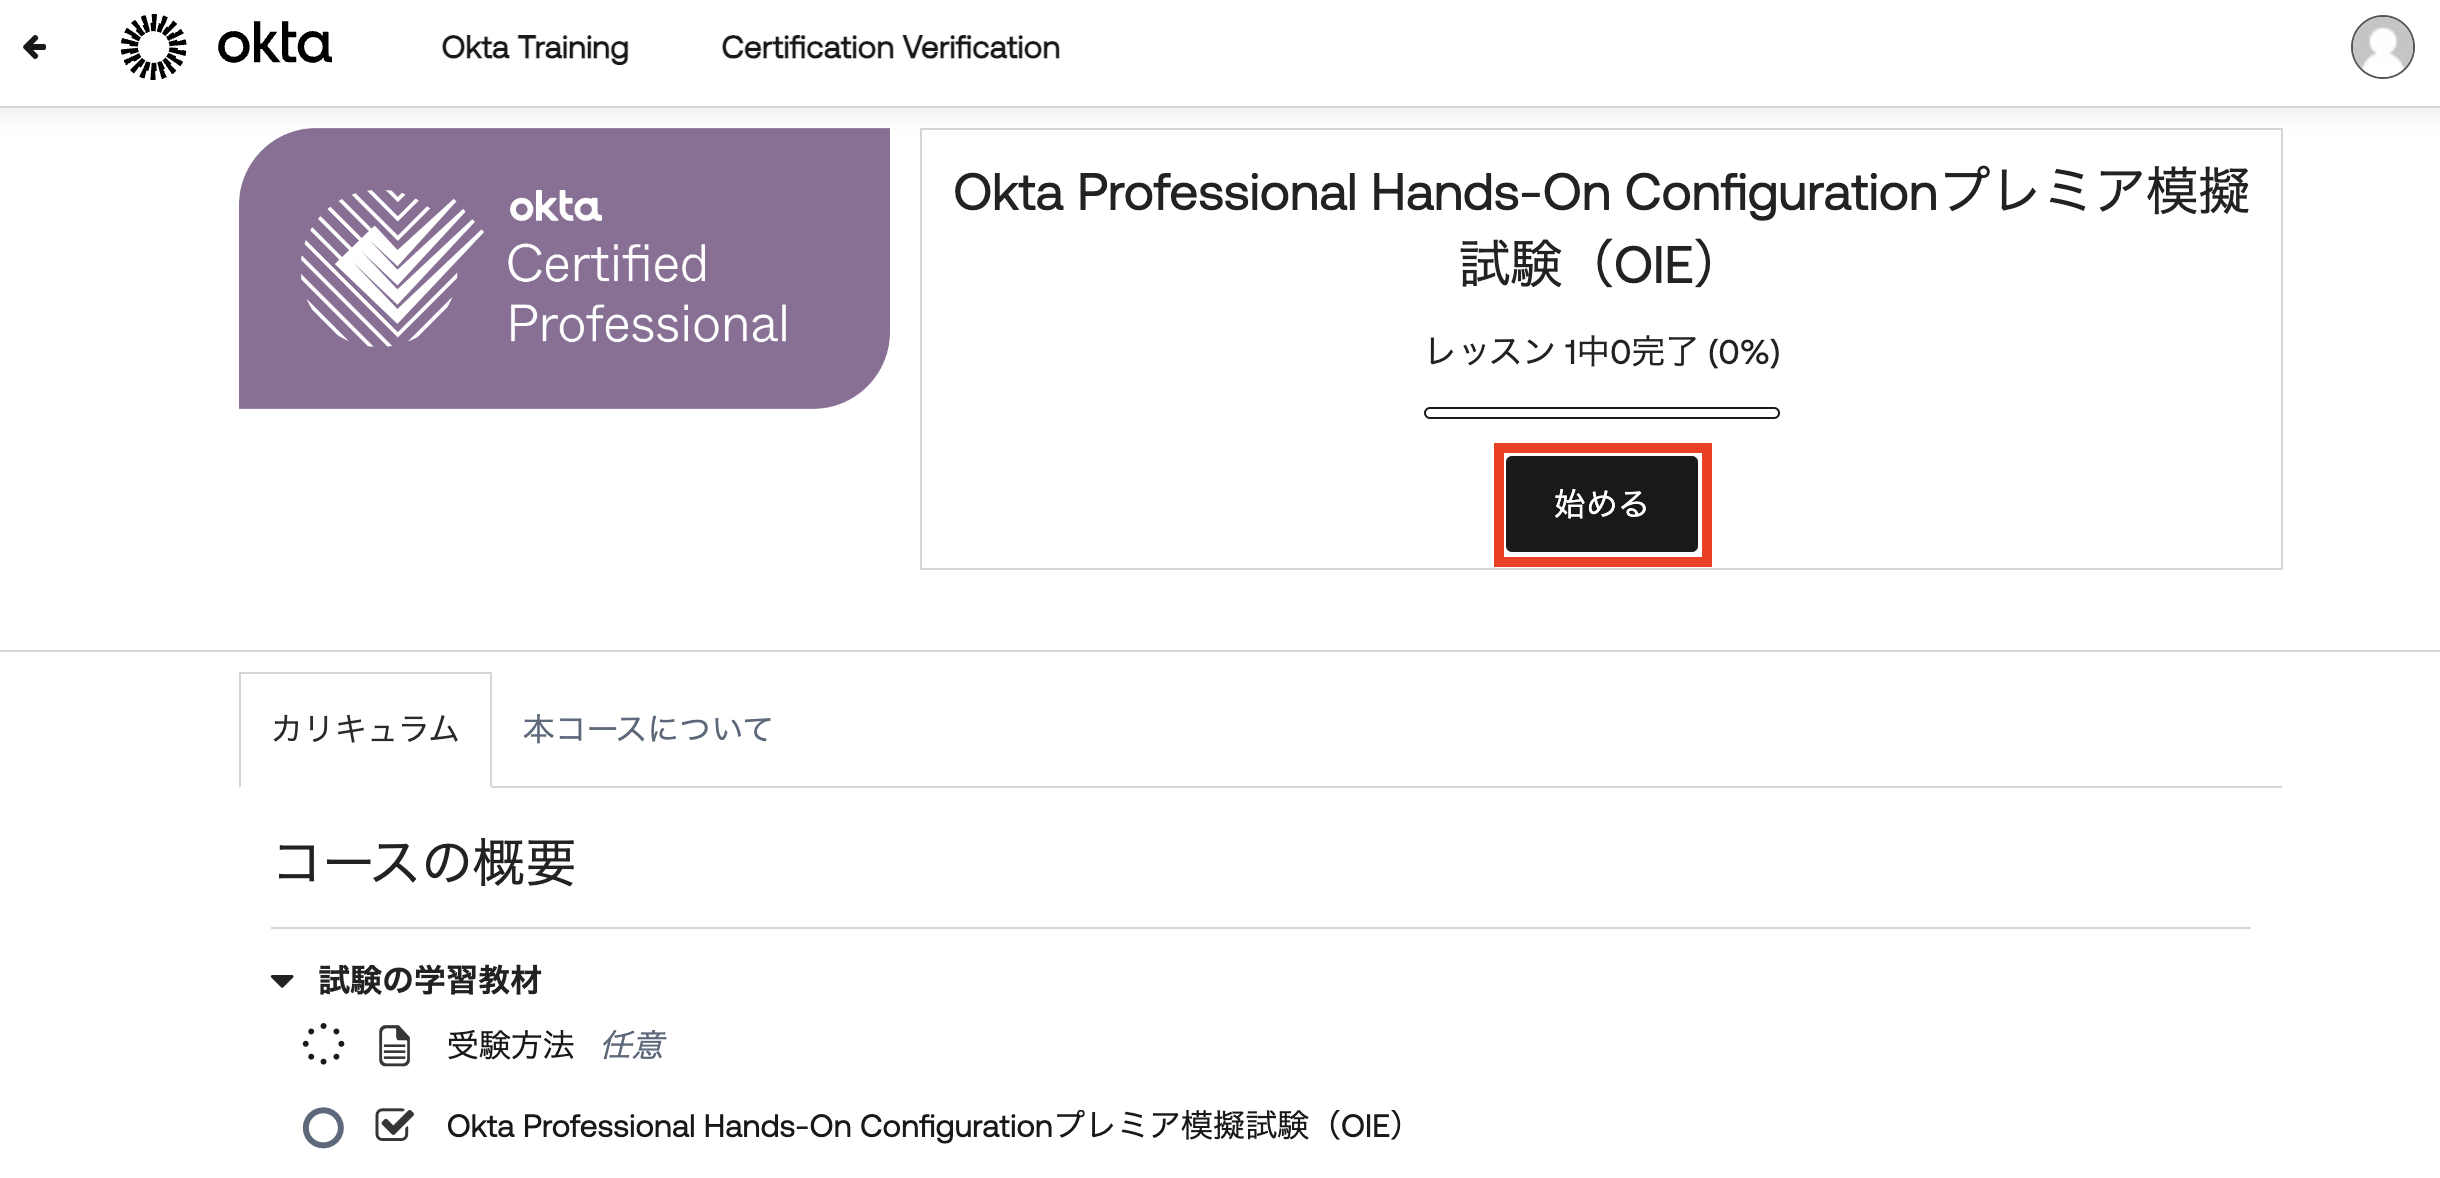 Image of the Okta Certified Professional Hands-On Configuration (OIE), with a focus on the call to action button.